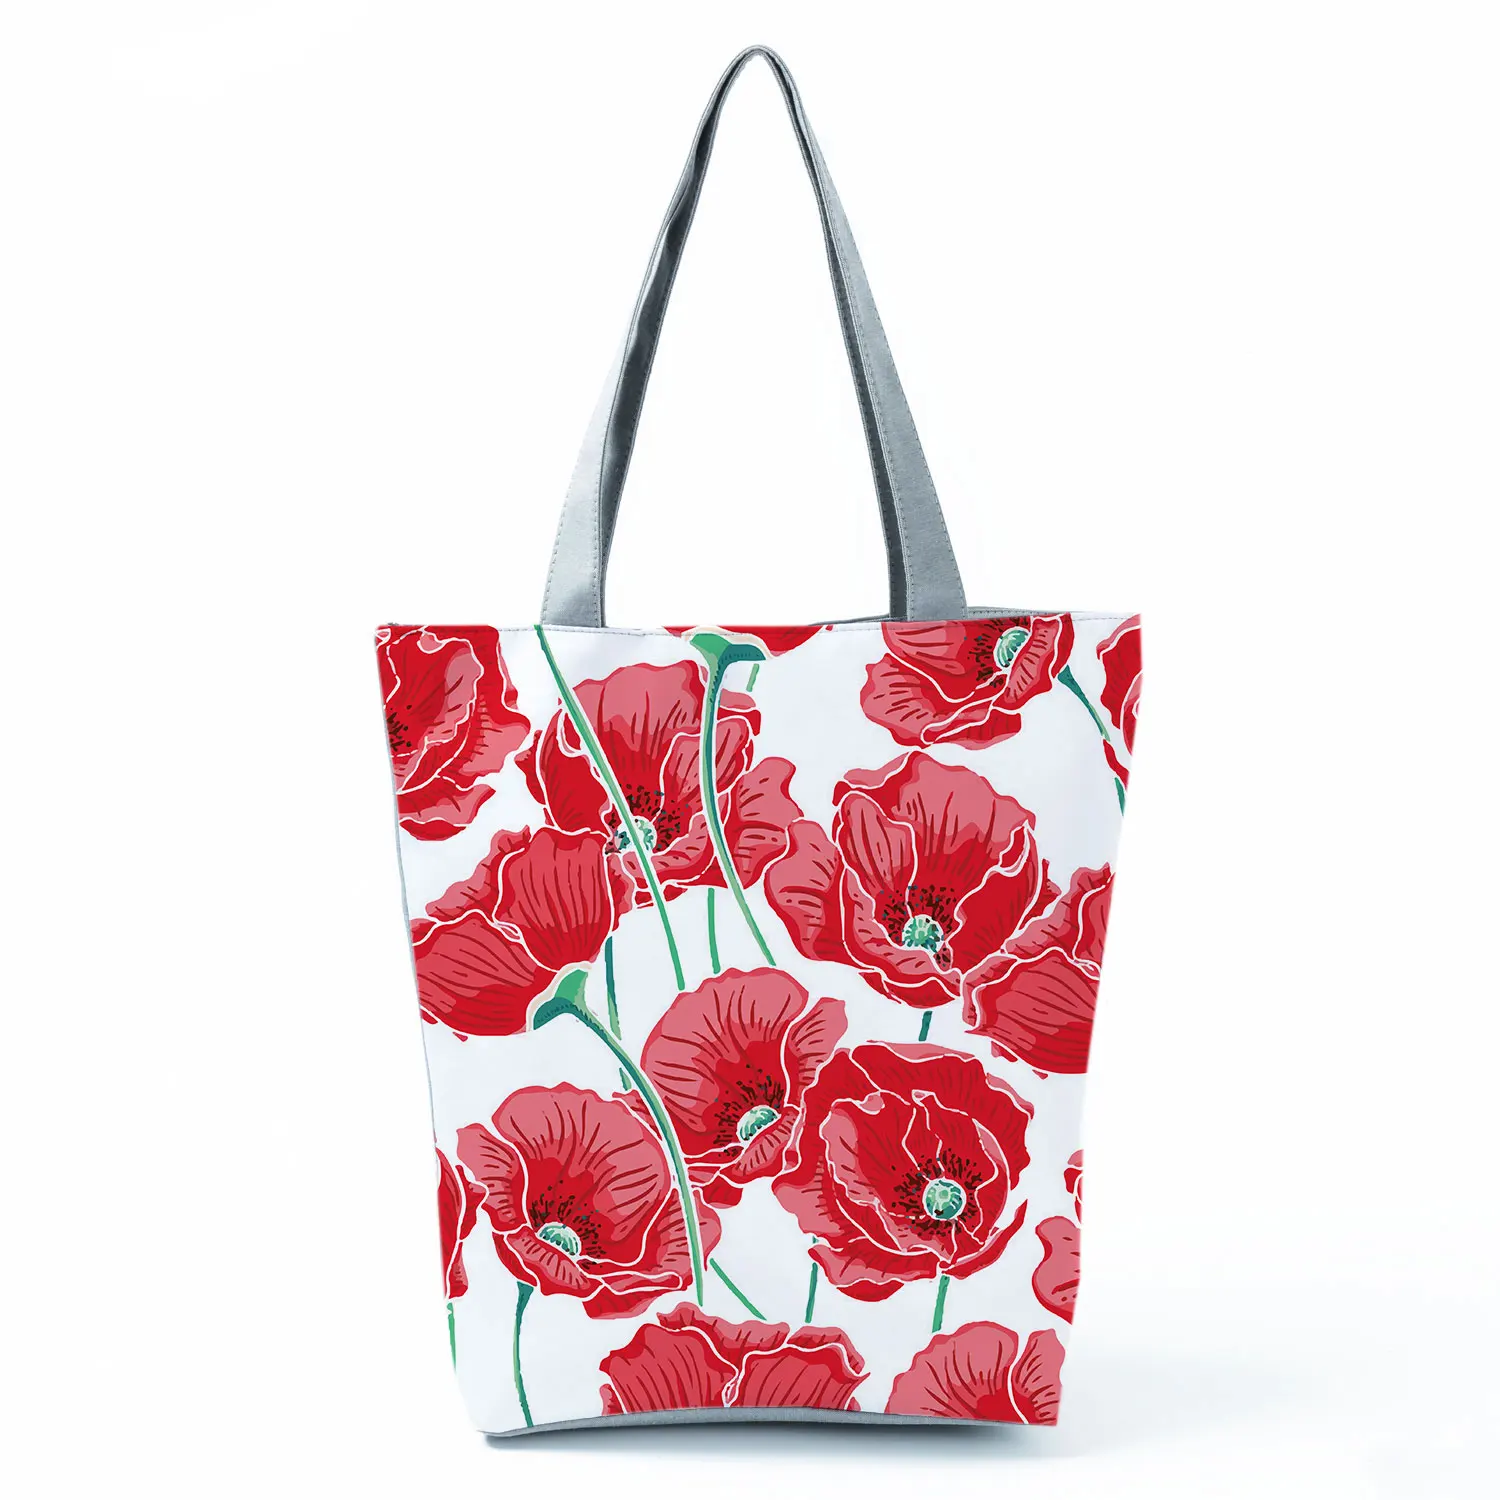 Female Canvas Handbag Fashion Colorful Embroidery Floral And Bird Printed Lady Shoulder Bag Summer Women Tote Eco Shopping Bag 